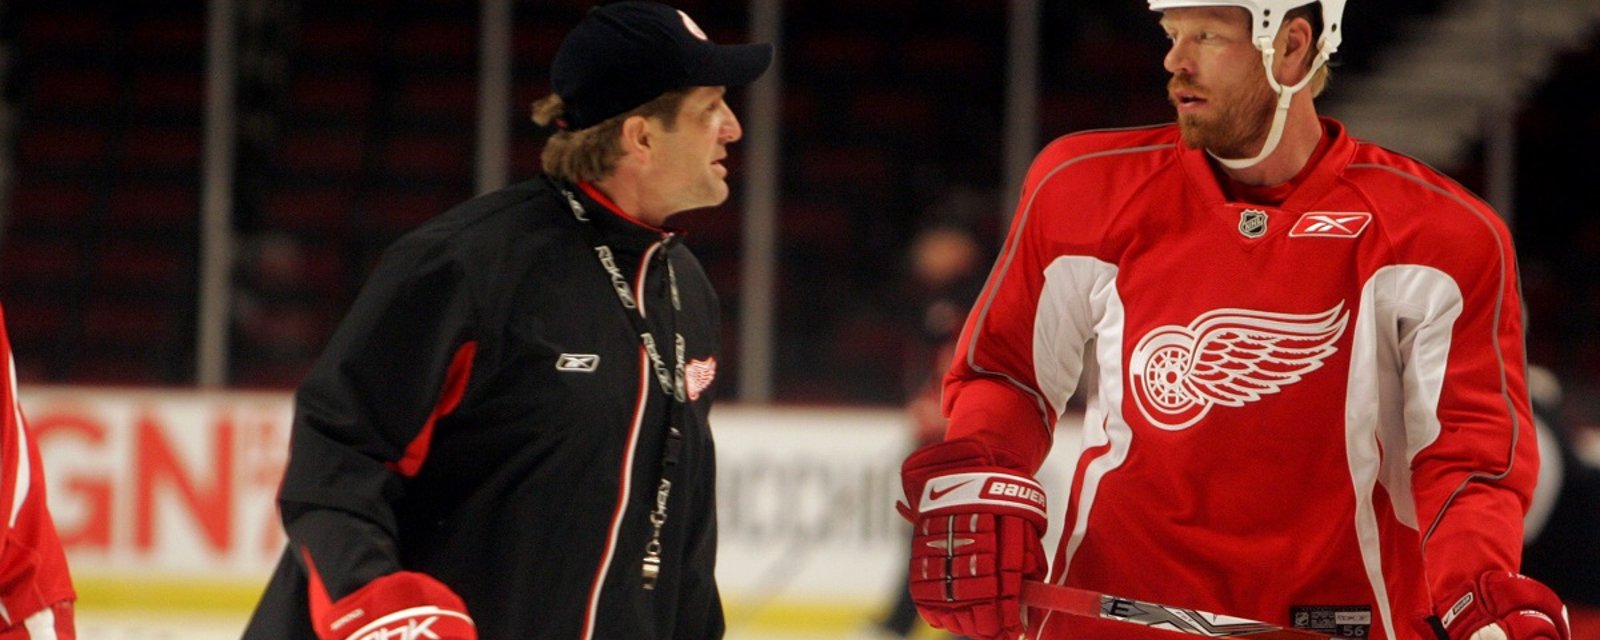 Chris Chelios details horrific abuse suffered by Johan Franzen at the hands of Mike Babcock.